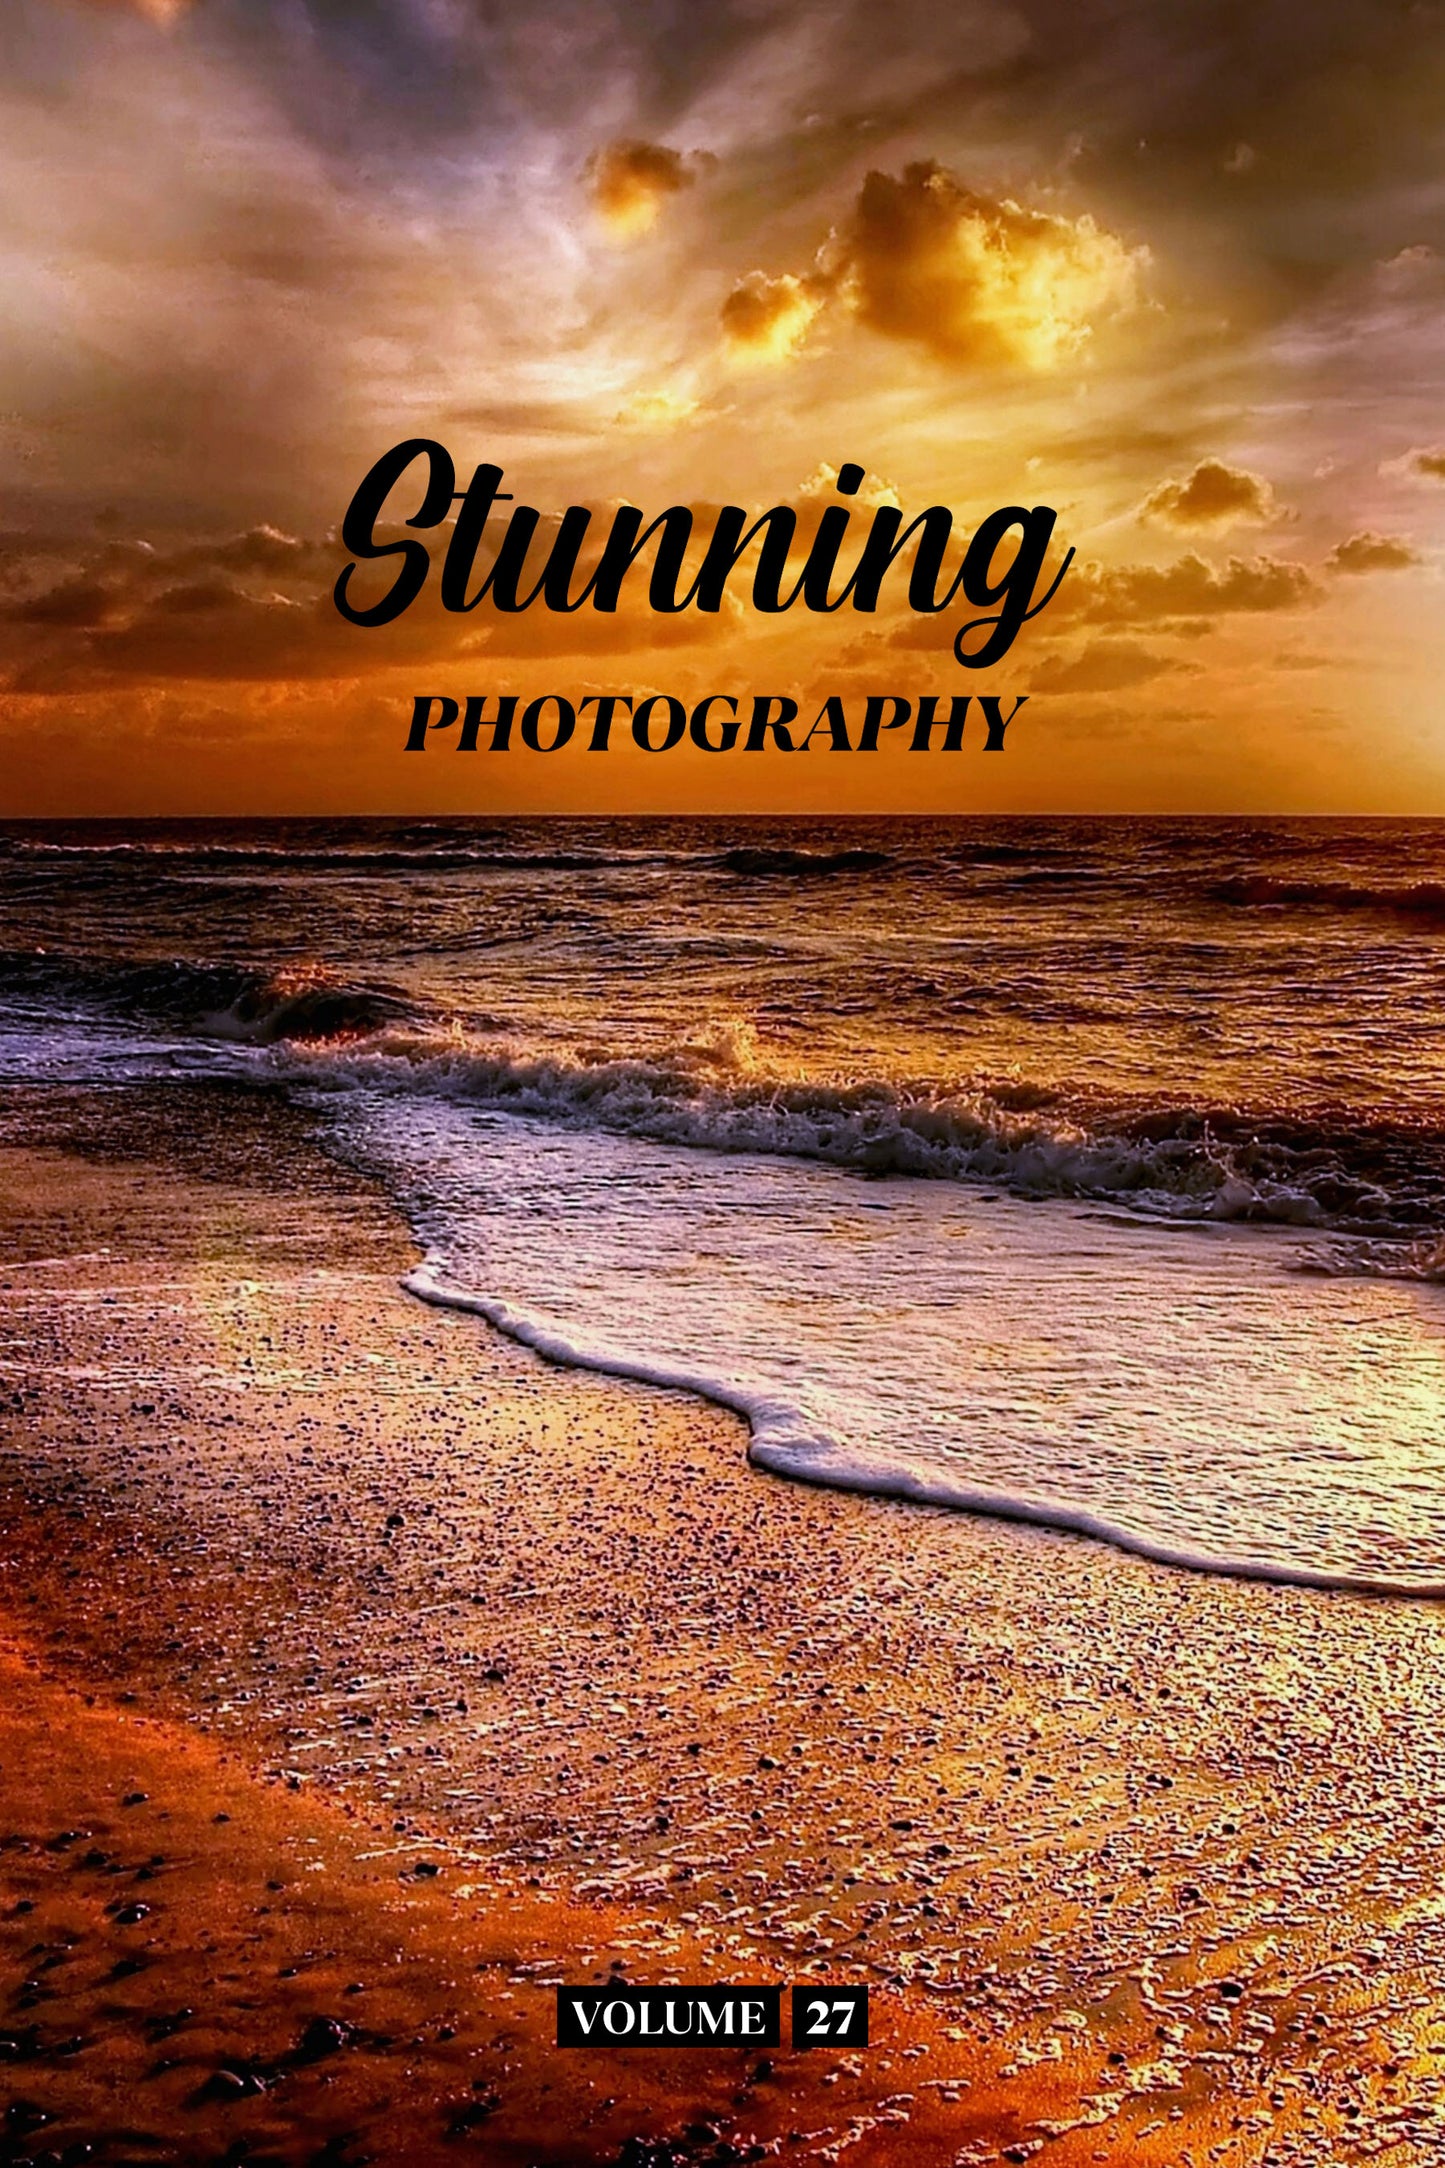 Stunning Photography Volume 27 (Physical Book Pre-Order)